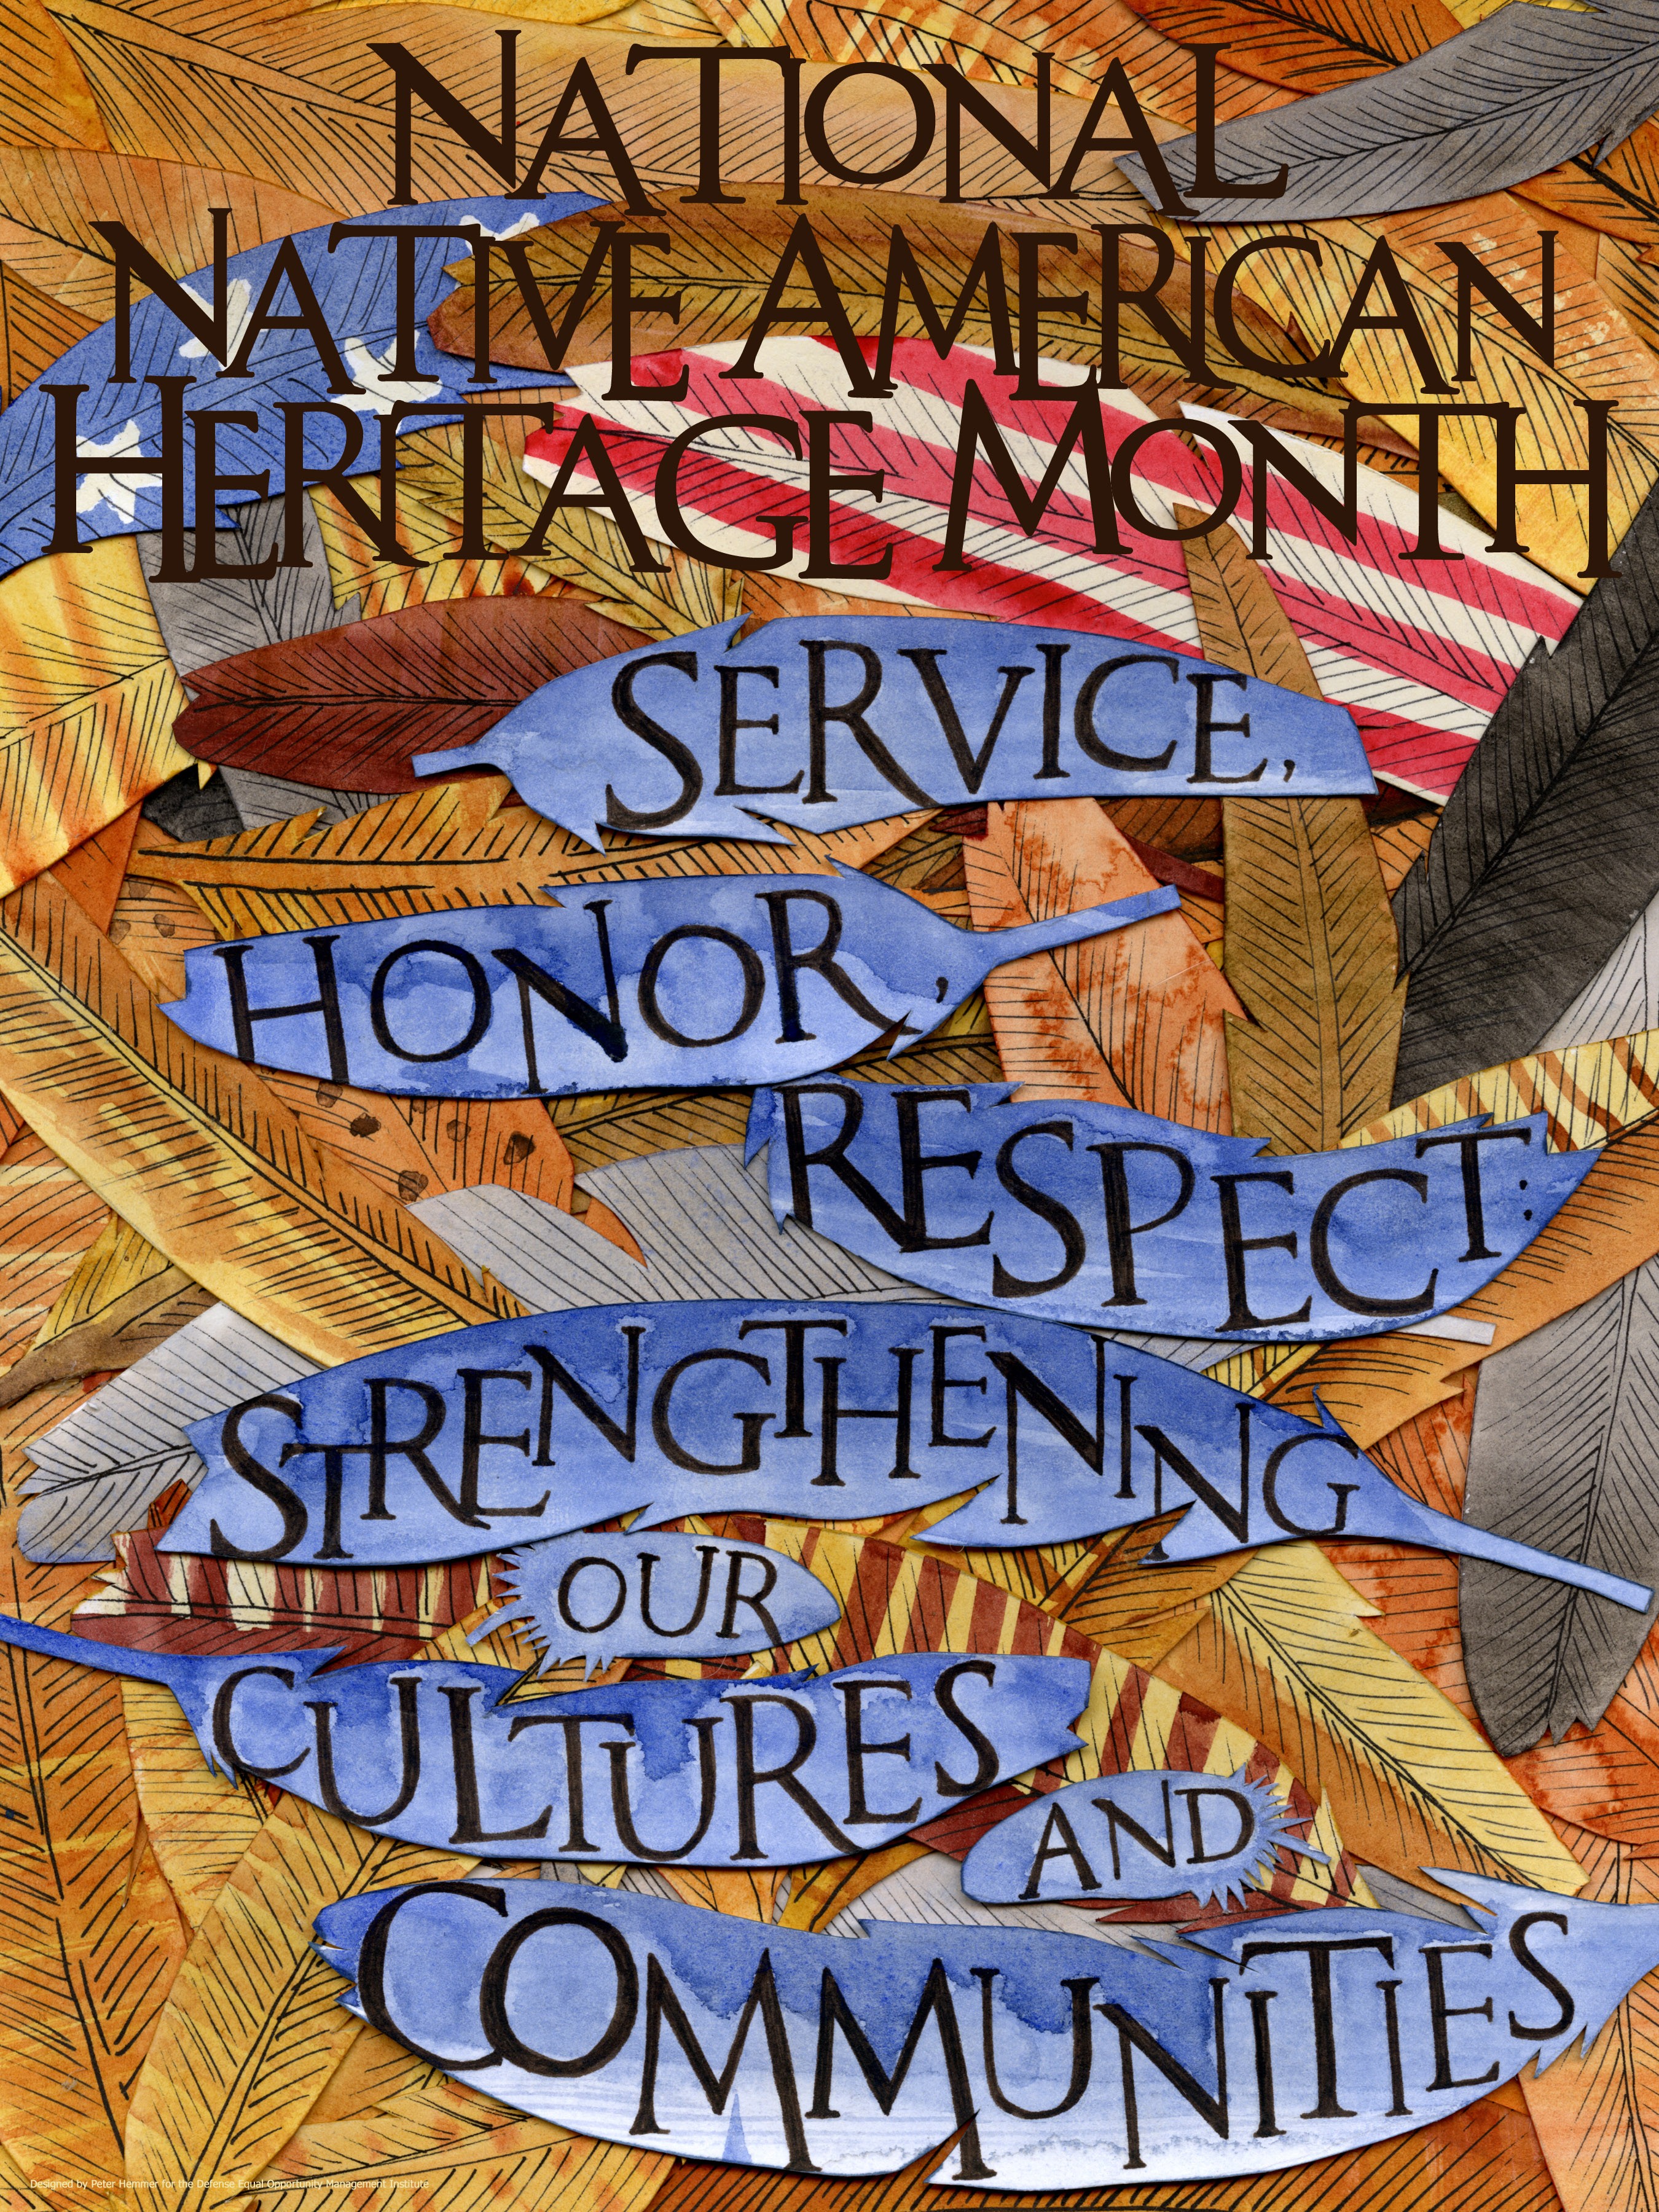 american heritage month